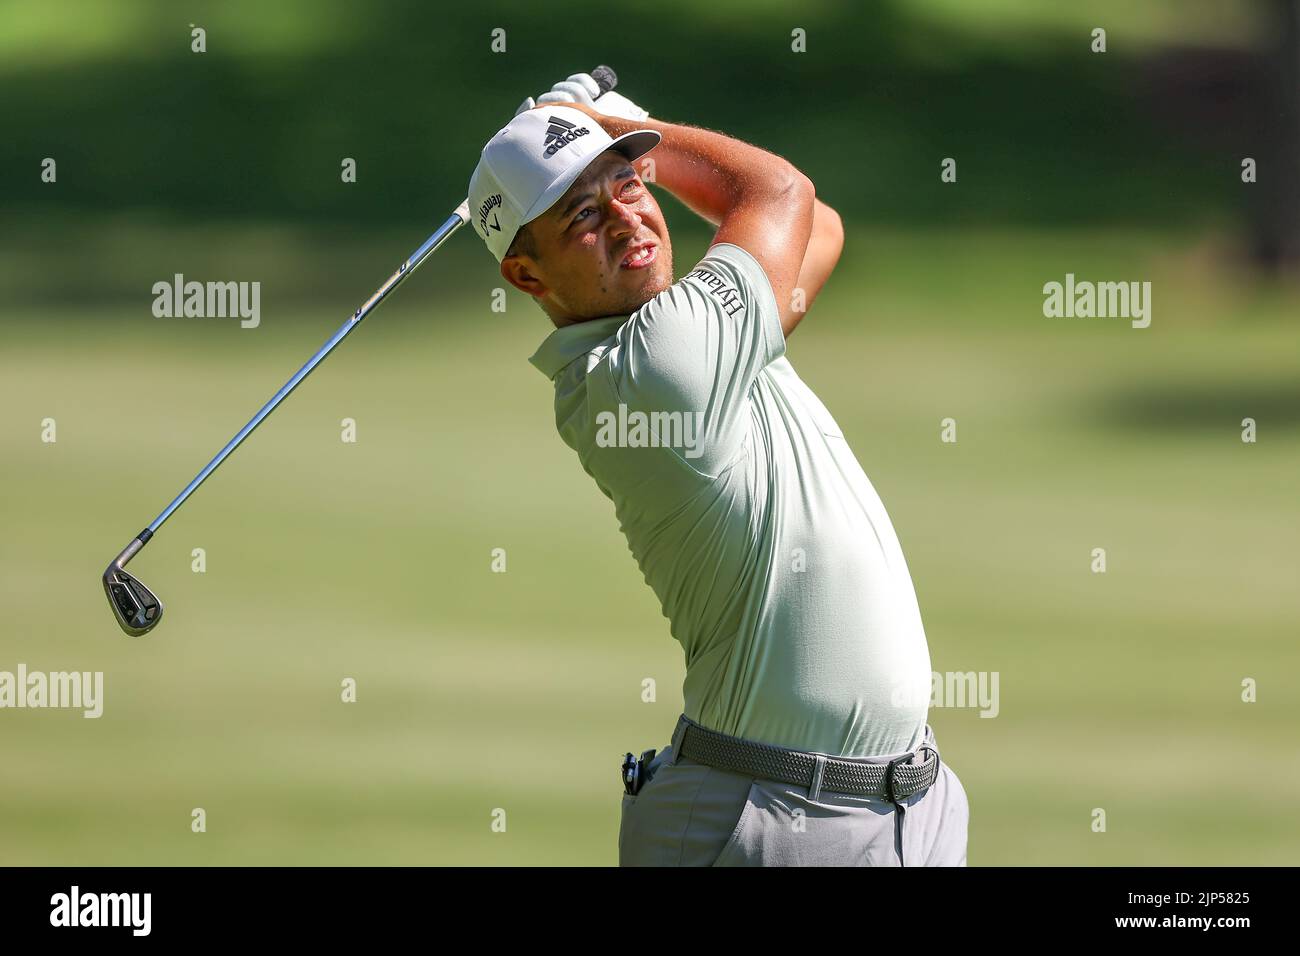 August 13, 2022: Xander Schauffele hits an iron shot during the third round of the FedEx St. Jude Championship golf tournament at TPC Southwind in Memphis, TN. Gray Siegel/Cal Sport Media Stock Photo